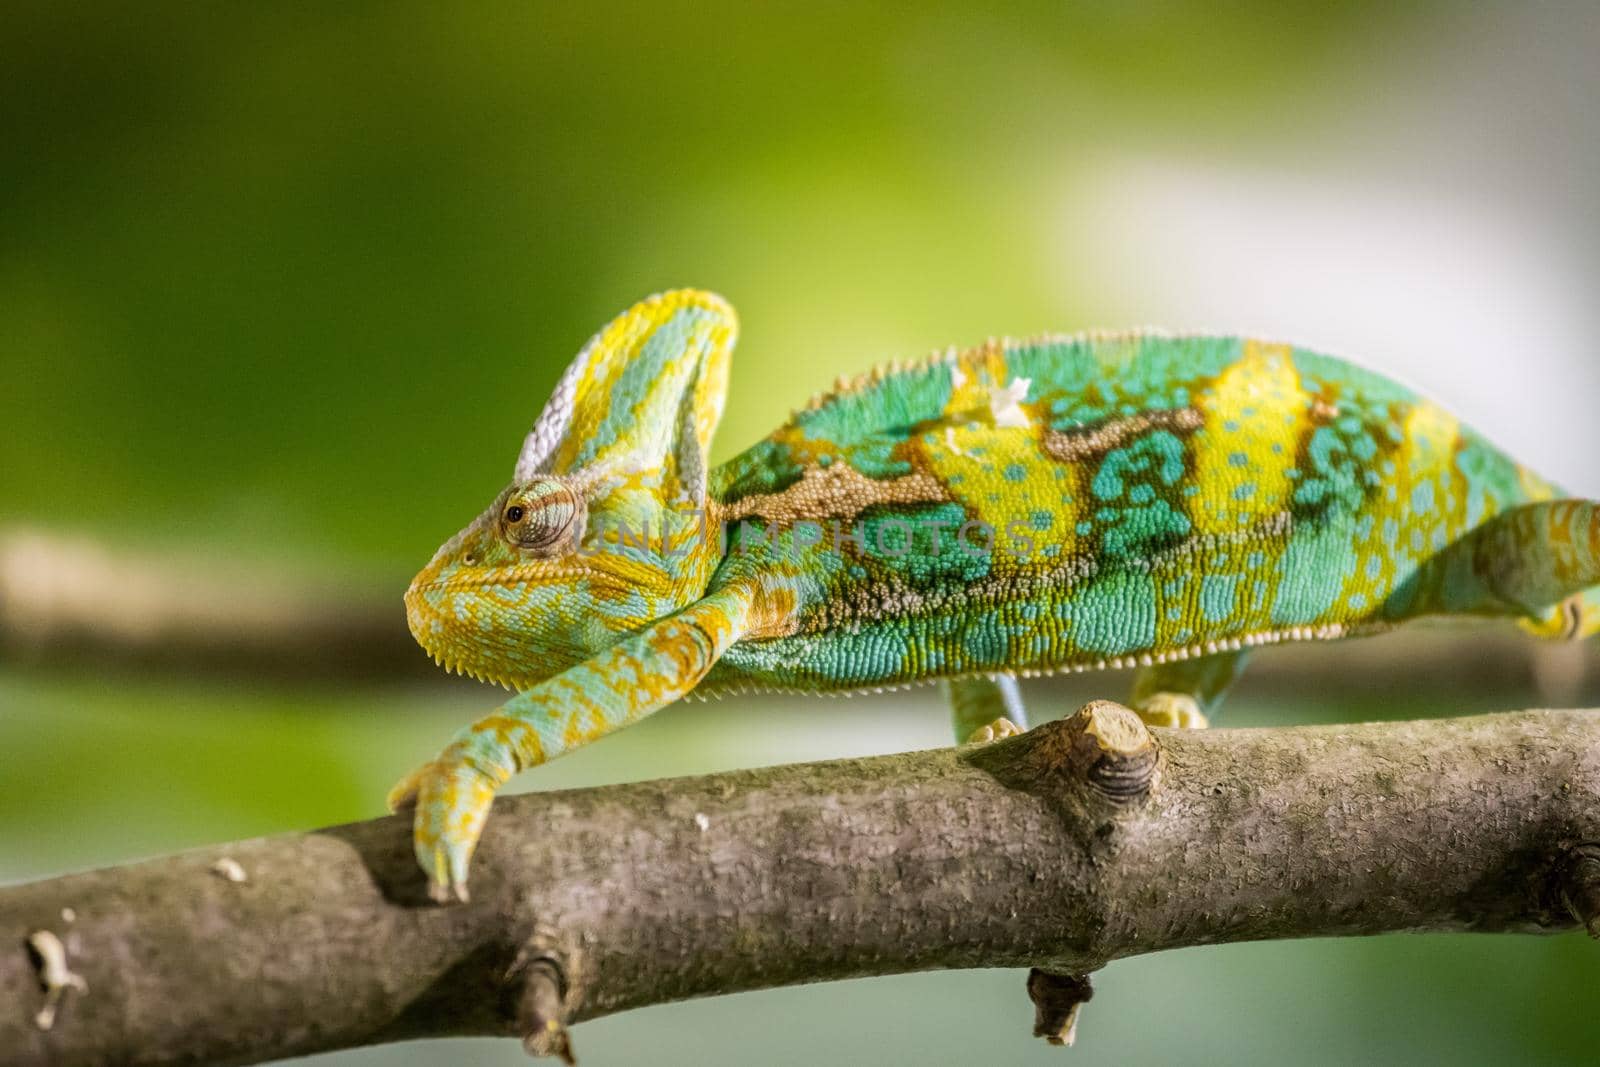 Chameleon in the zoo: Close-up picture of a chameleon climbing on a tree branch by Daxenbichler